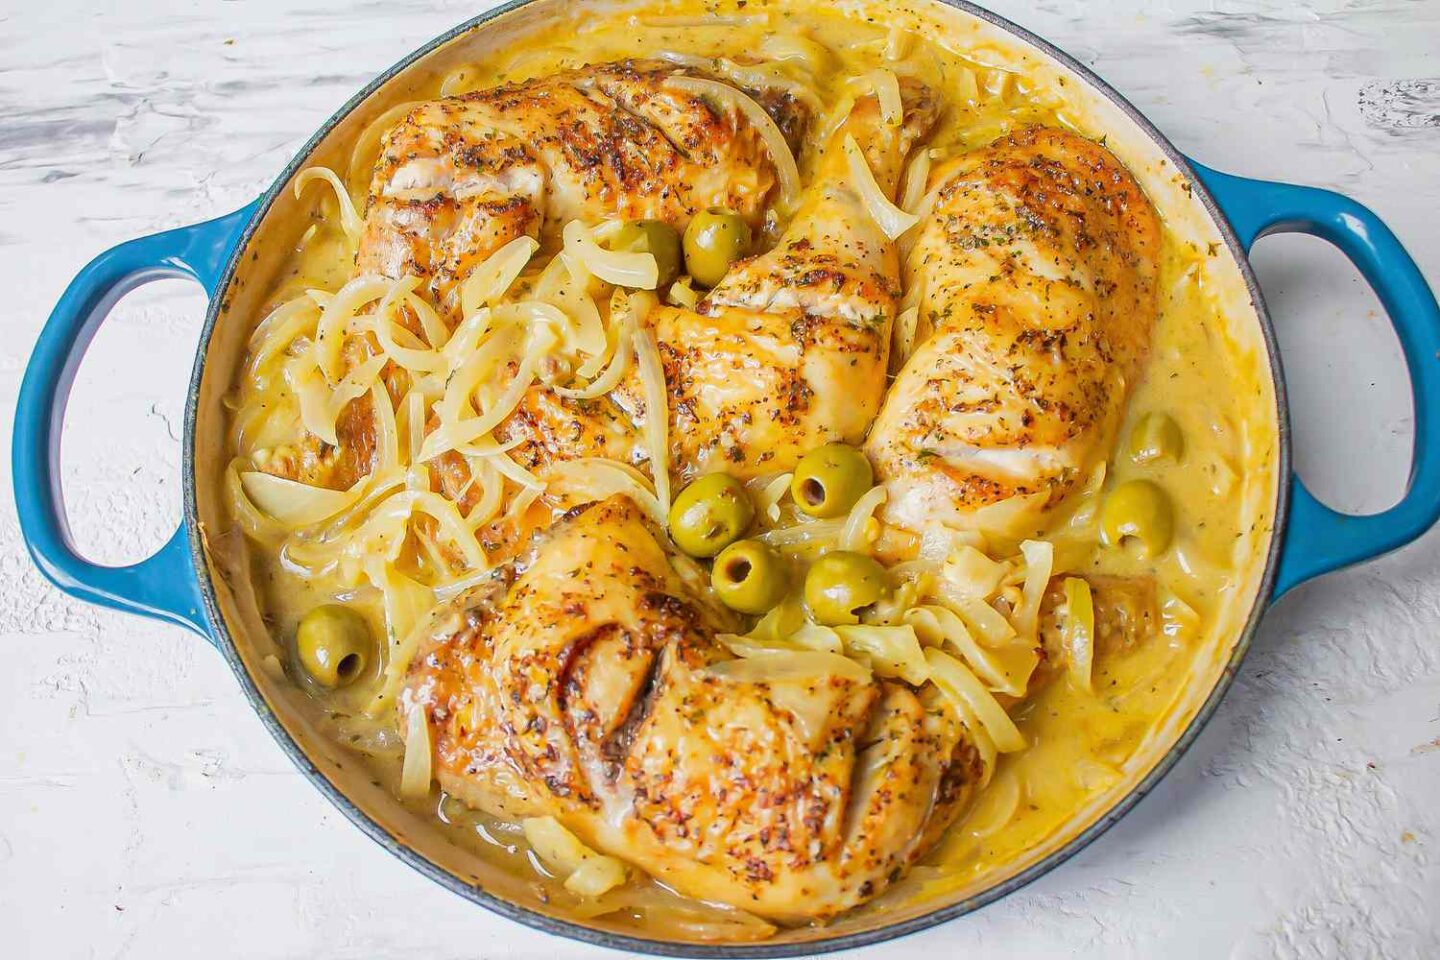 Savor the tangy goodness of Yassa Chicken, a Senegalese culinary delight that tantalizes the taste buds. #YassaChicken #Senegal". Photo Credit: simplyrecipes.com